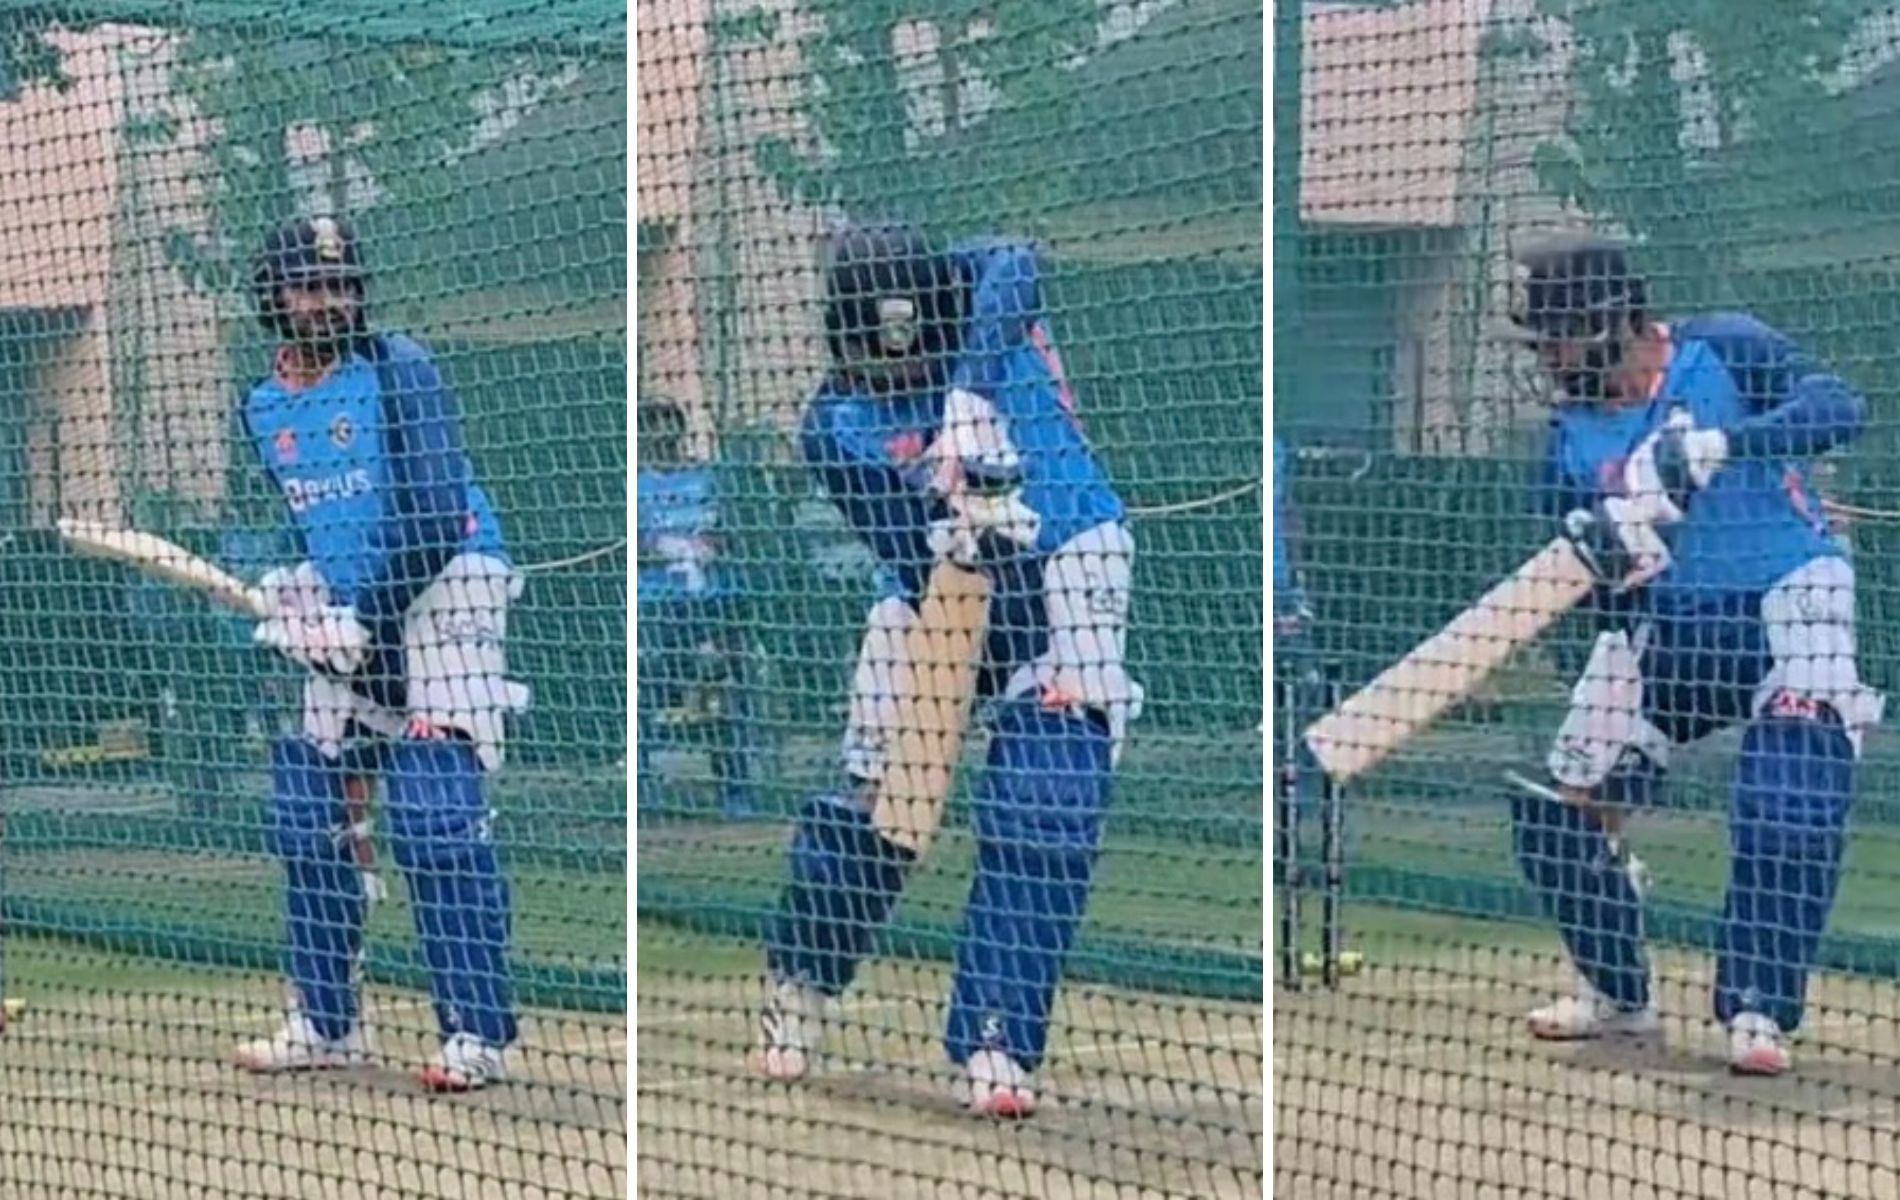 Rohit Sharma in the nets. (Pics: BCCI)